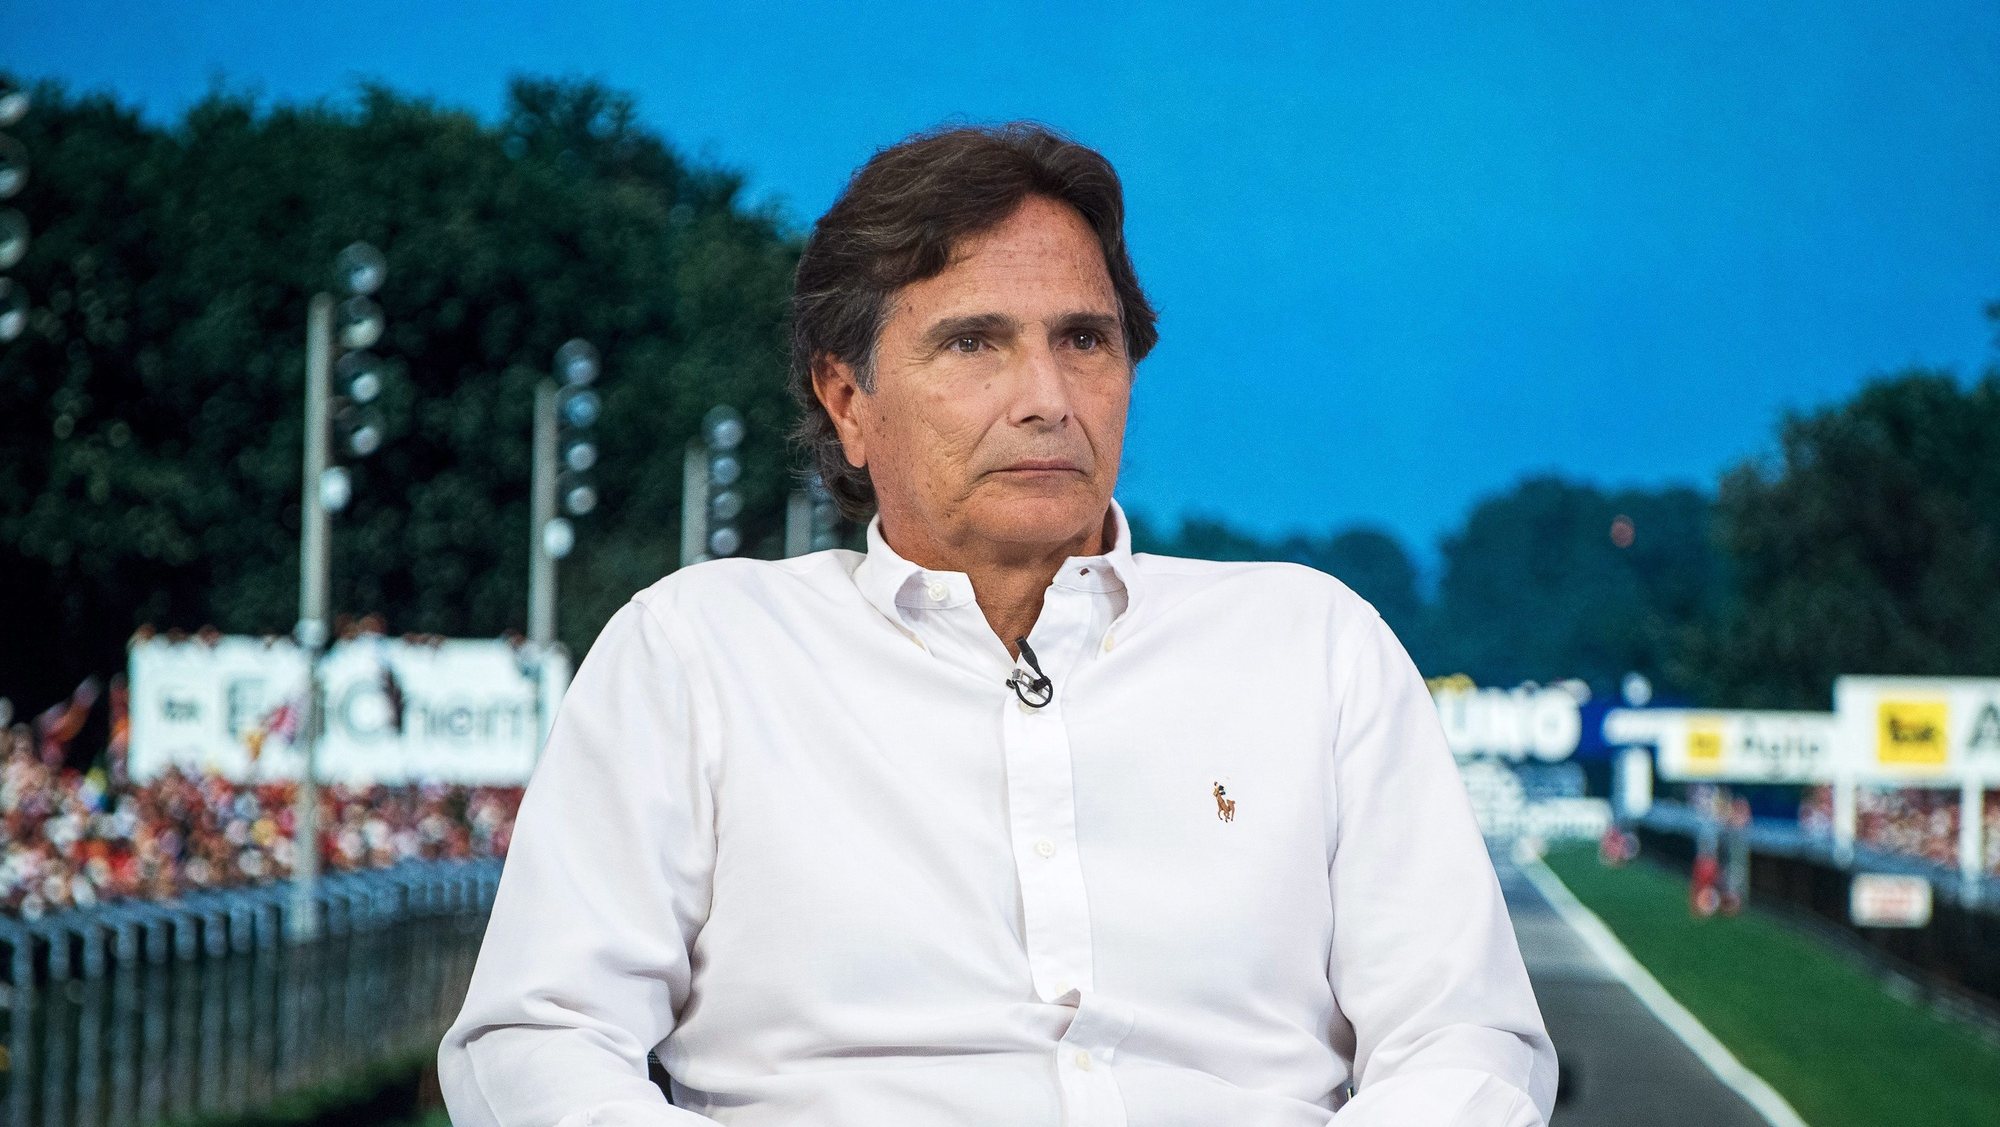 epa04857989 Three-time Formula One world champion Nelson Piquet of Brazil attends the shooting of Hungarian Television’s Formula One magazine in Budapest, Hungary, 23 July 2015. The 2015 Formula One Grand Prix of Hungary will take place on 27 July 2015.  EPA/JANOS MARJAI HUNGARY OUT